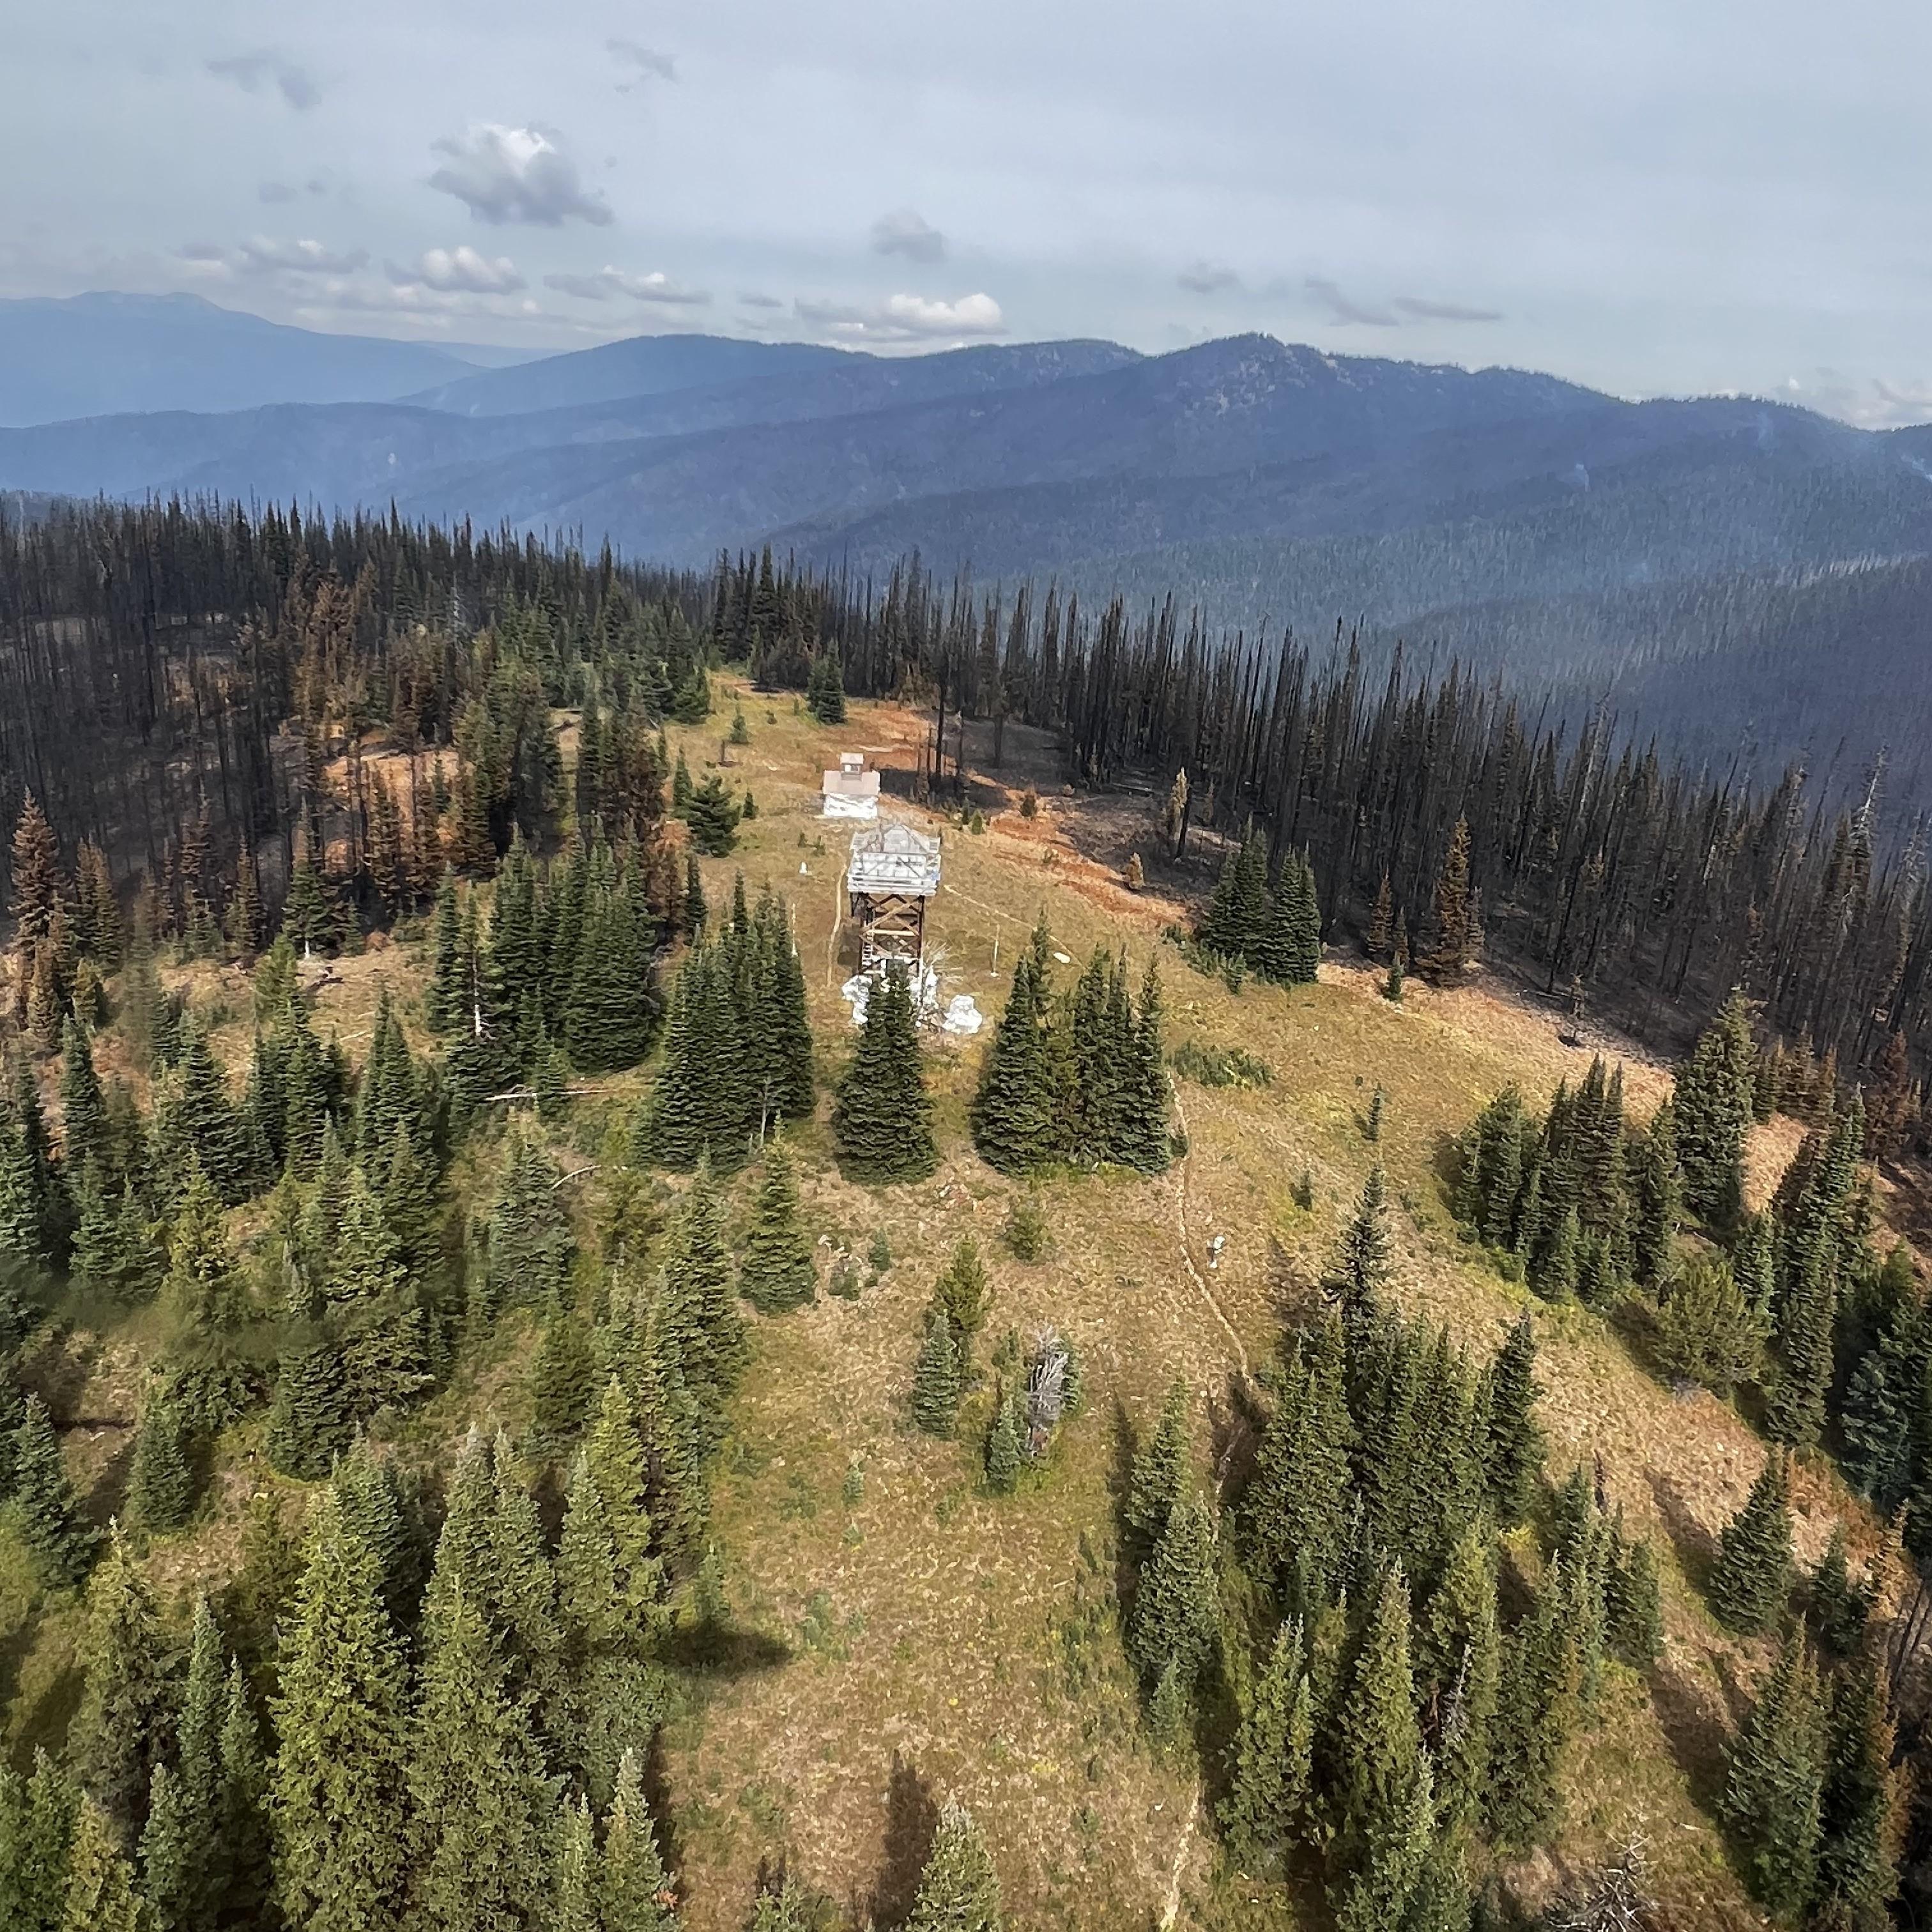 Firefighters protected the lookout and cabins from the Park fire on the Monument 83 site.